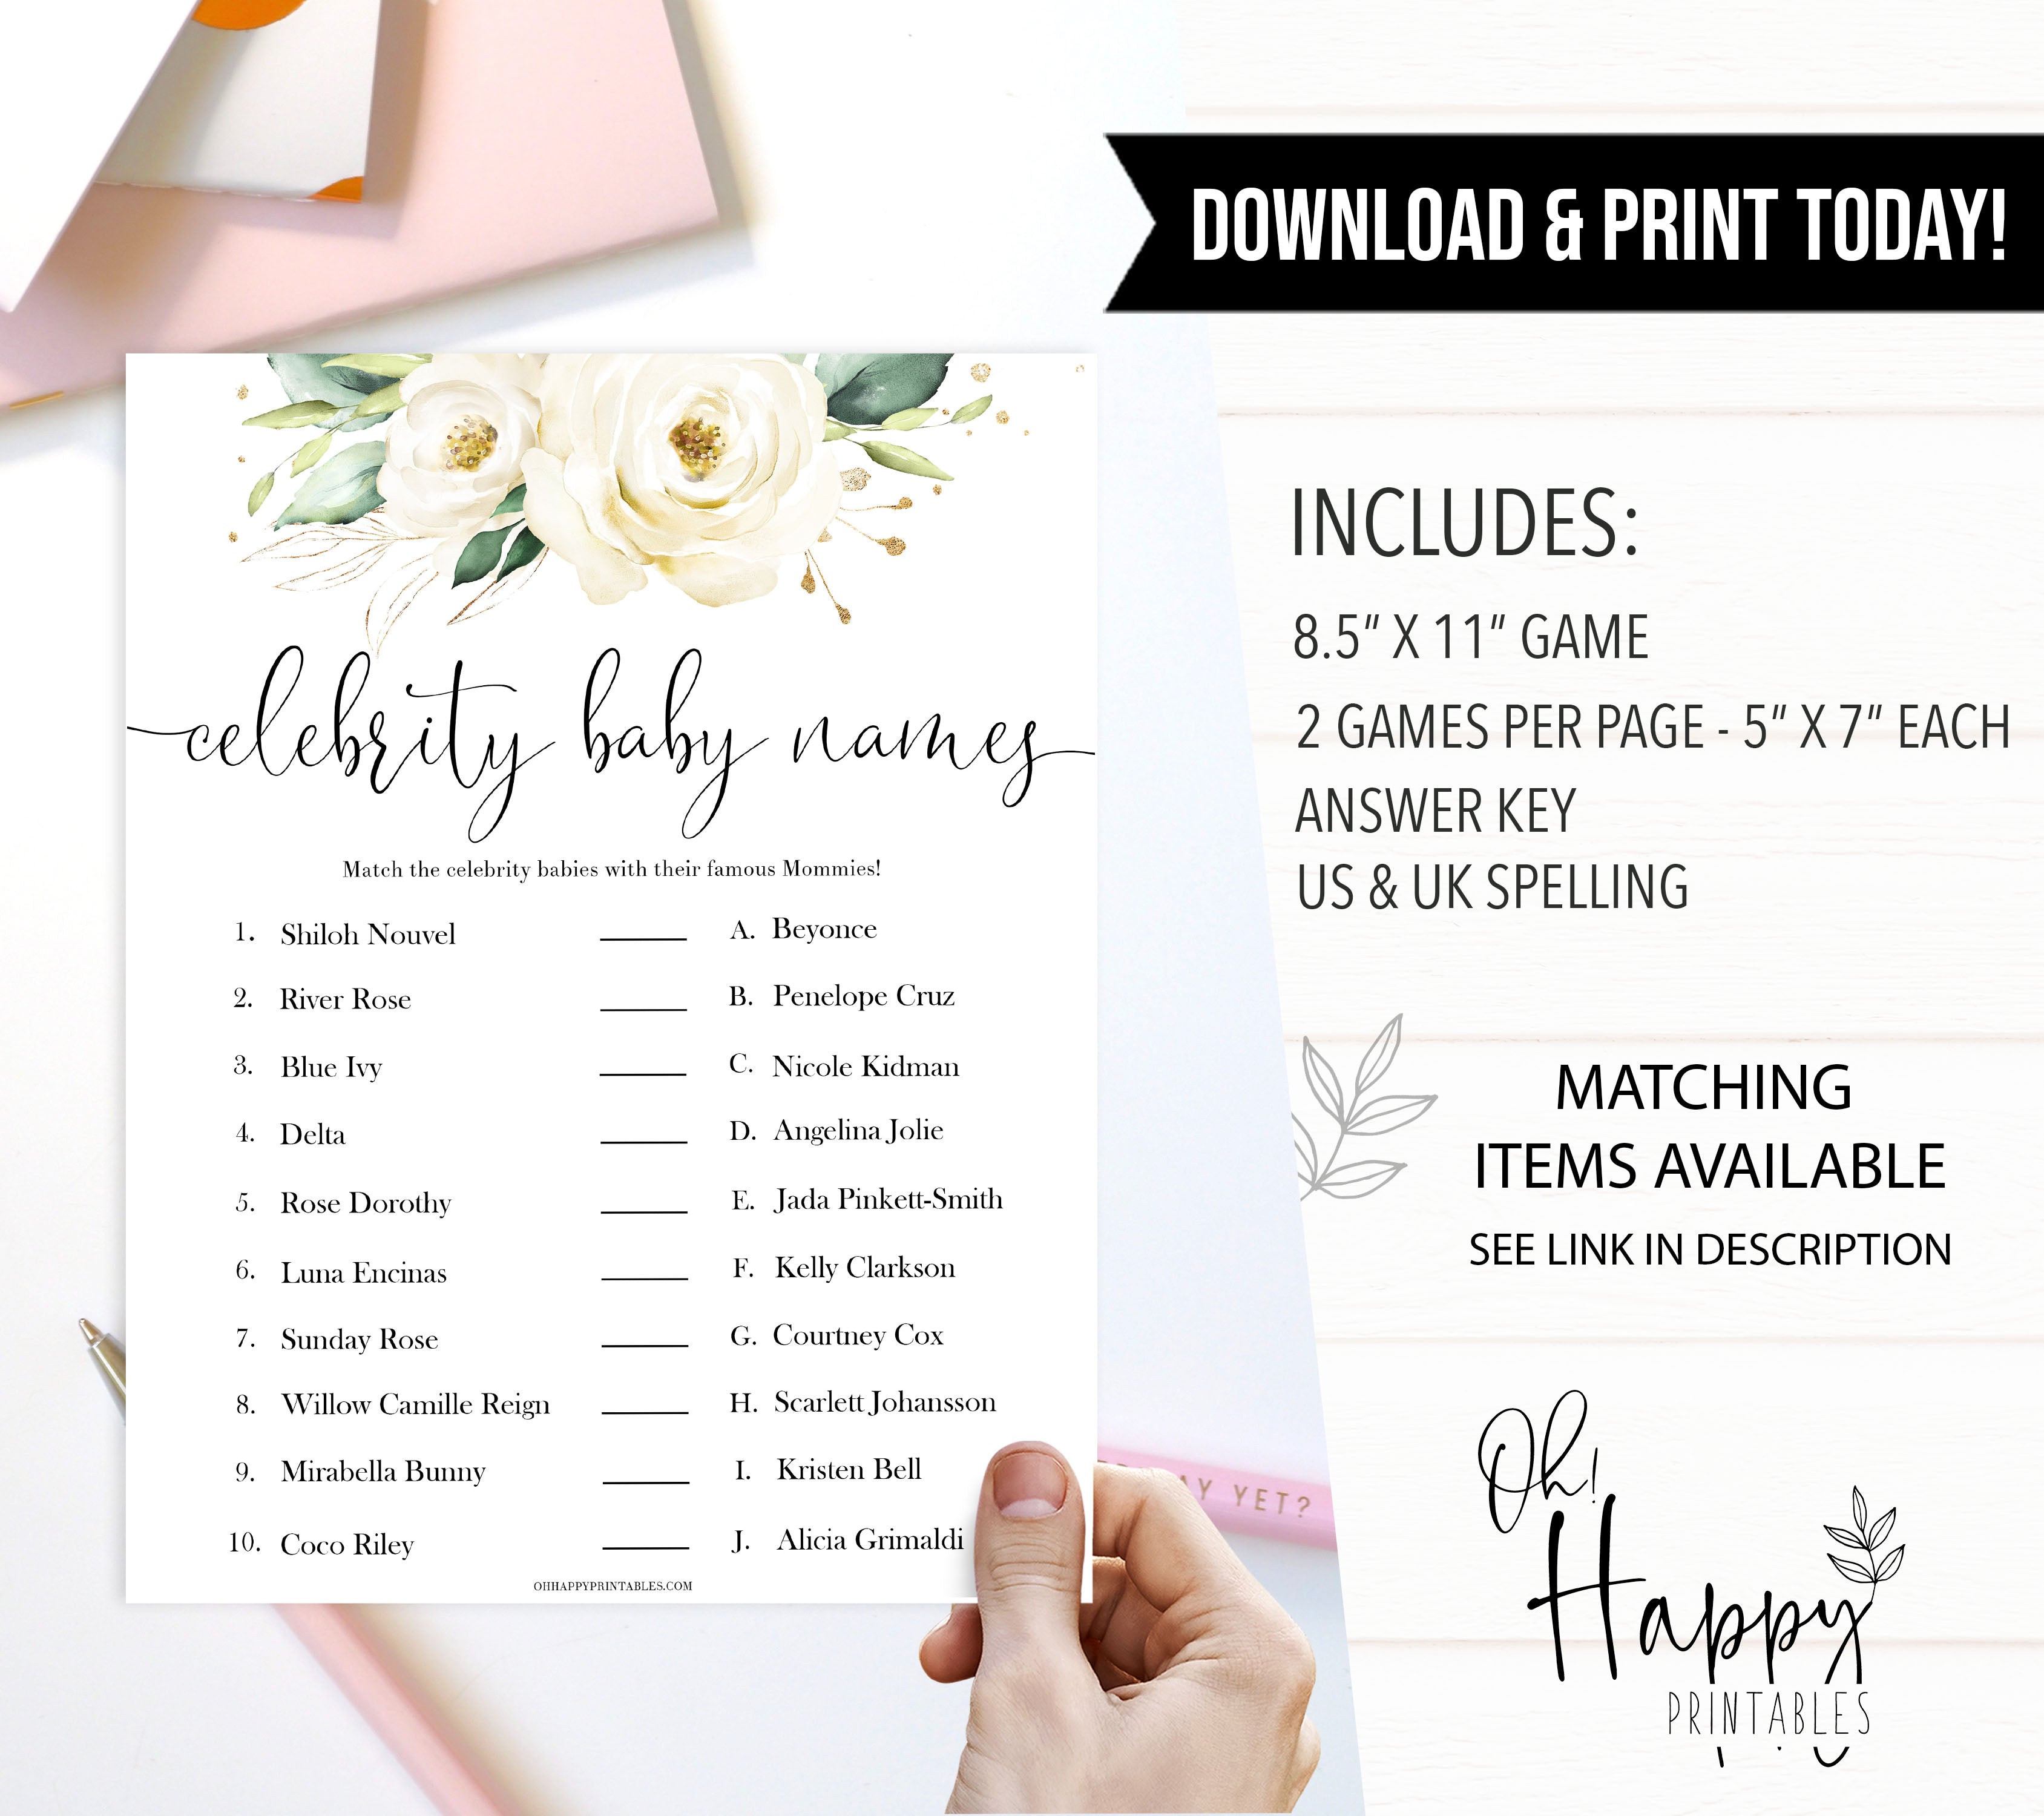 celebrity baby names game, Printable baby shower games, shite floral baby games, baby shower games, fun baby shower ideas, top baby shower ideas, floral baby shower, baby shower games, fun floral baby shower ideas